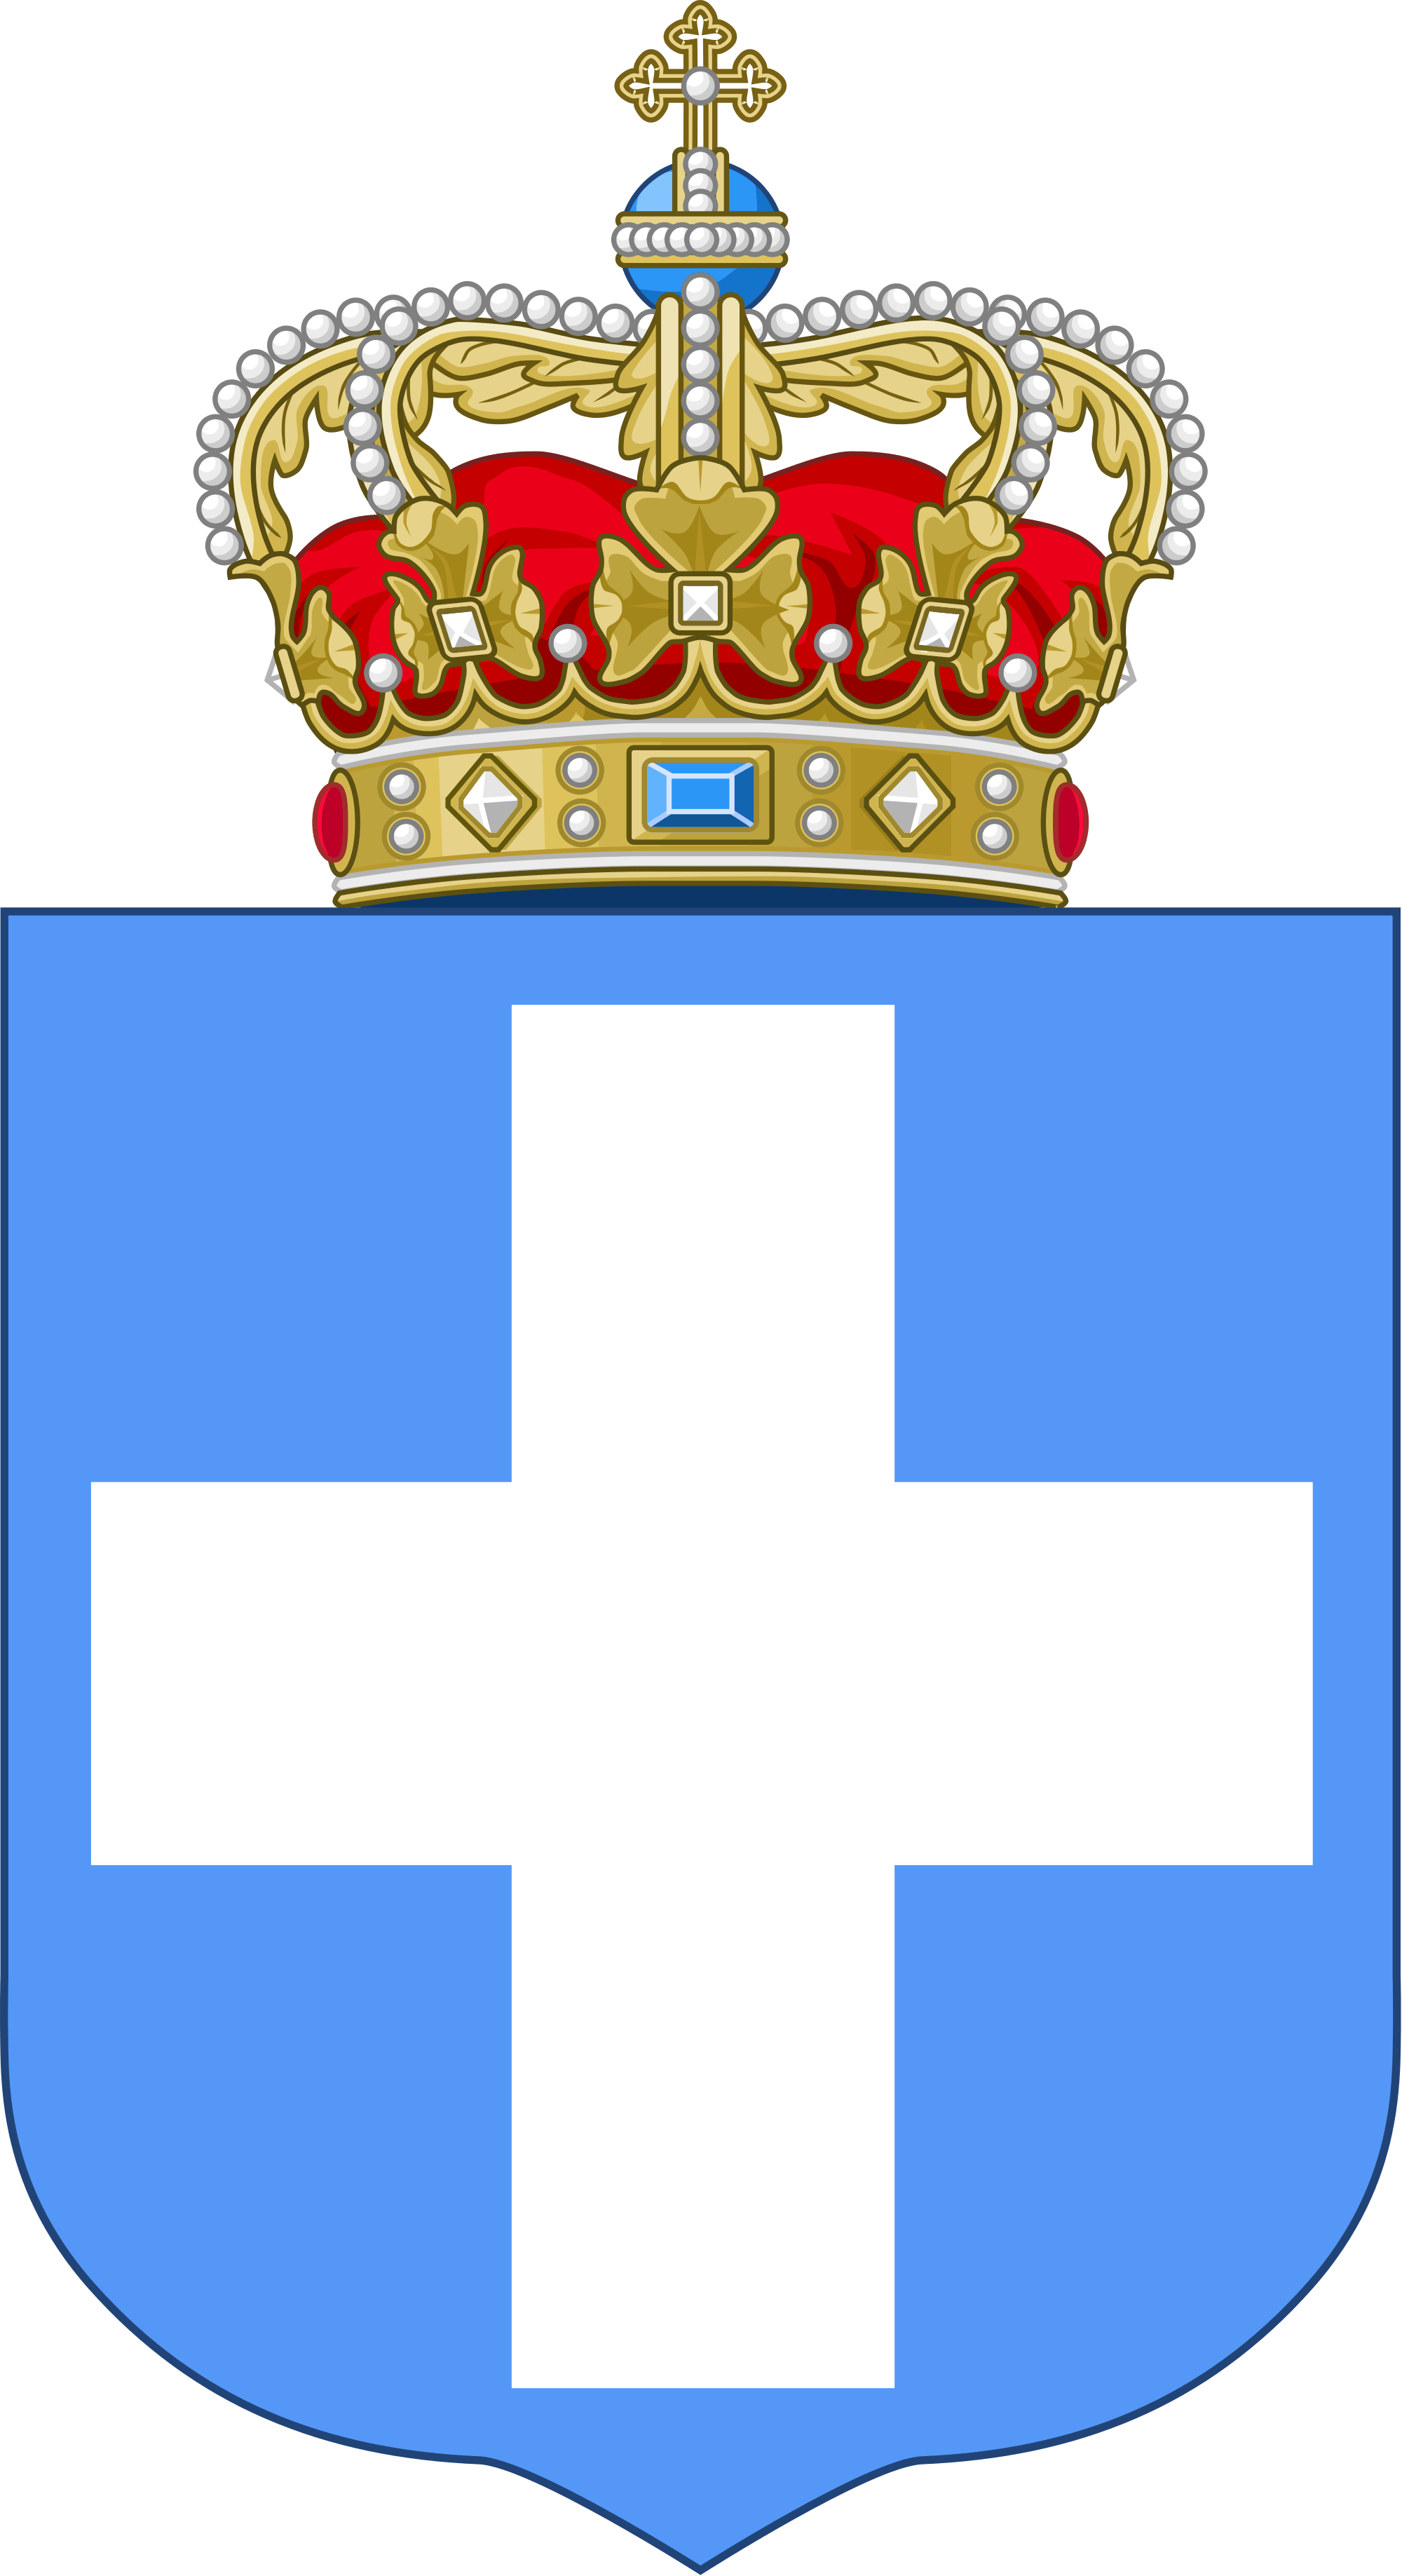 Blue Cross with Crown Logo - File:Royal Arms of Greece (blue cross).svg - Wikimedia Commons